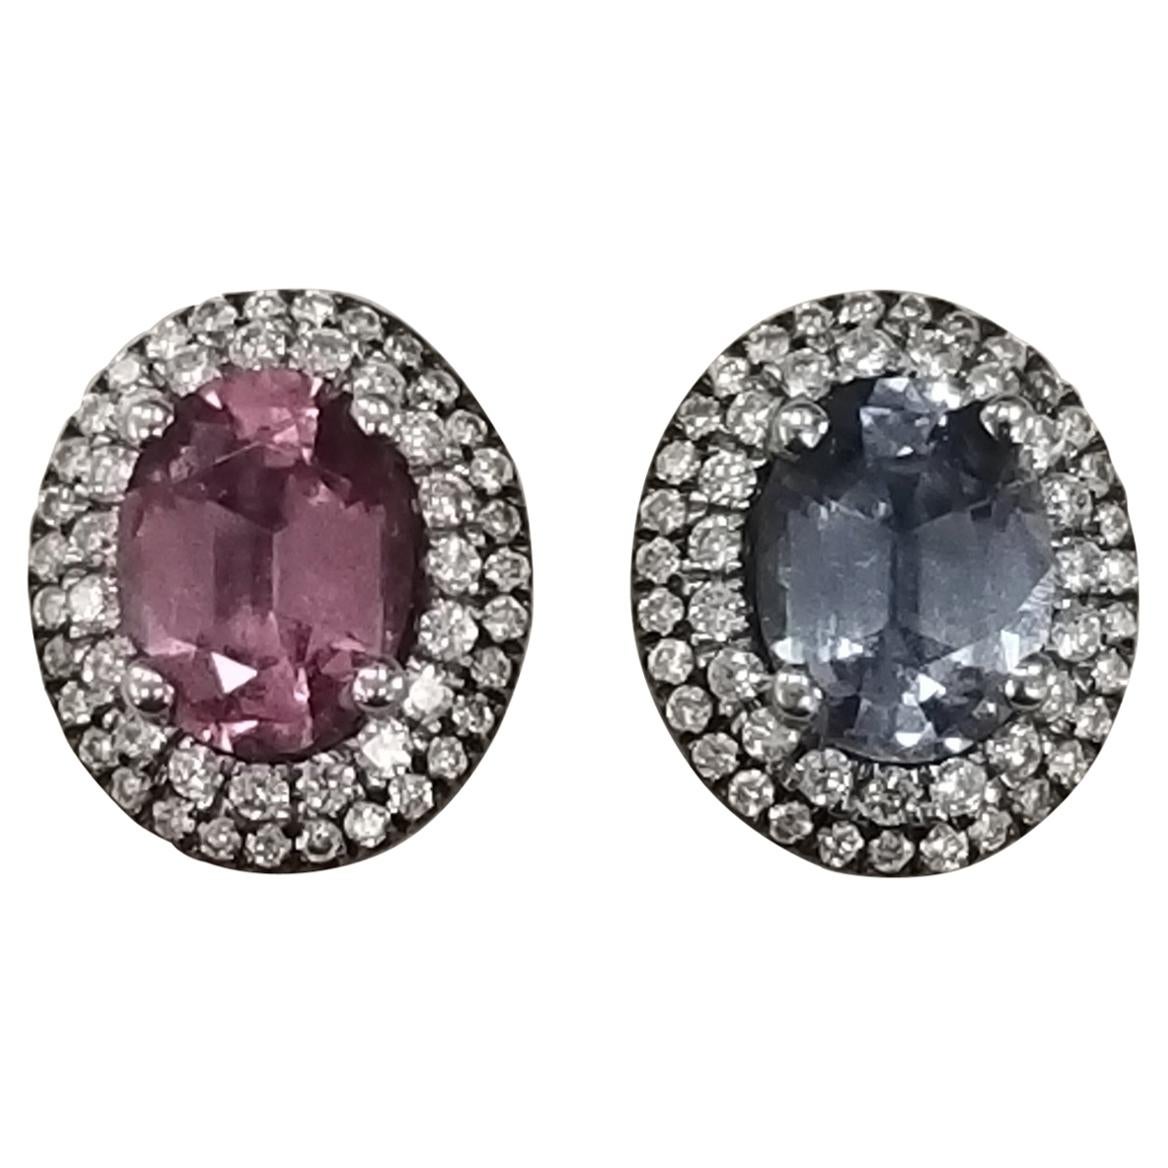 2 Oval Pink and Blue Spinel Diamond Earrings Set in 14 Karat White Gold